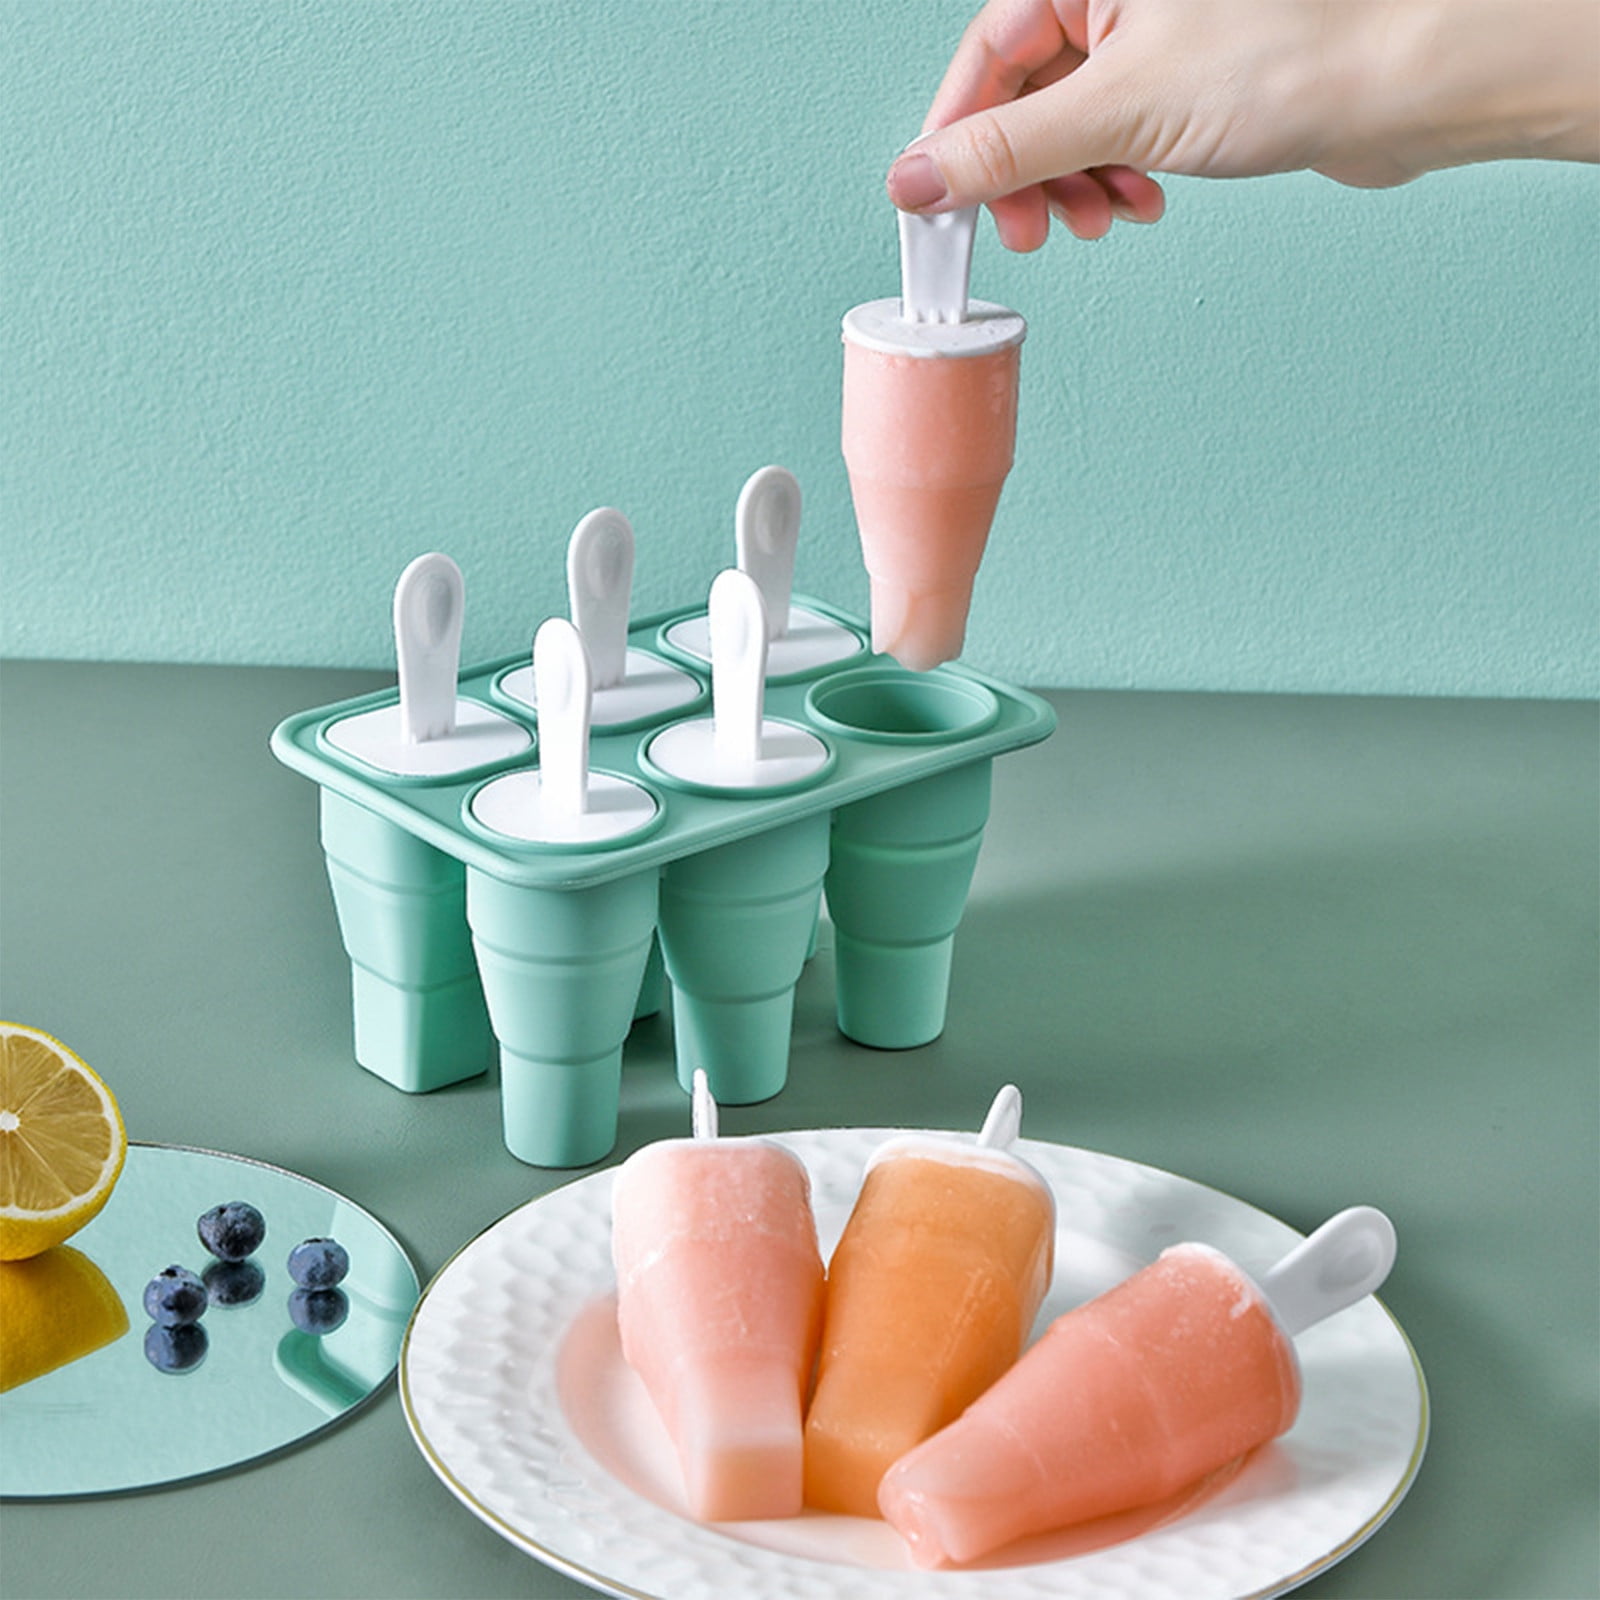 Suwhwea Ice Mold Silicone Ice Pop-Molds, Easy Release Ice Cream Mold, Reusable Popsicle Stick with for Homemade Popsicles & Ice Cream on Clearance